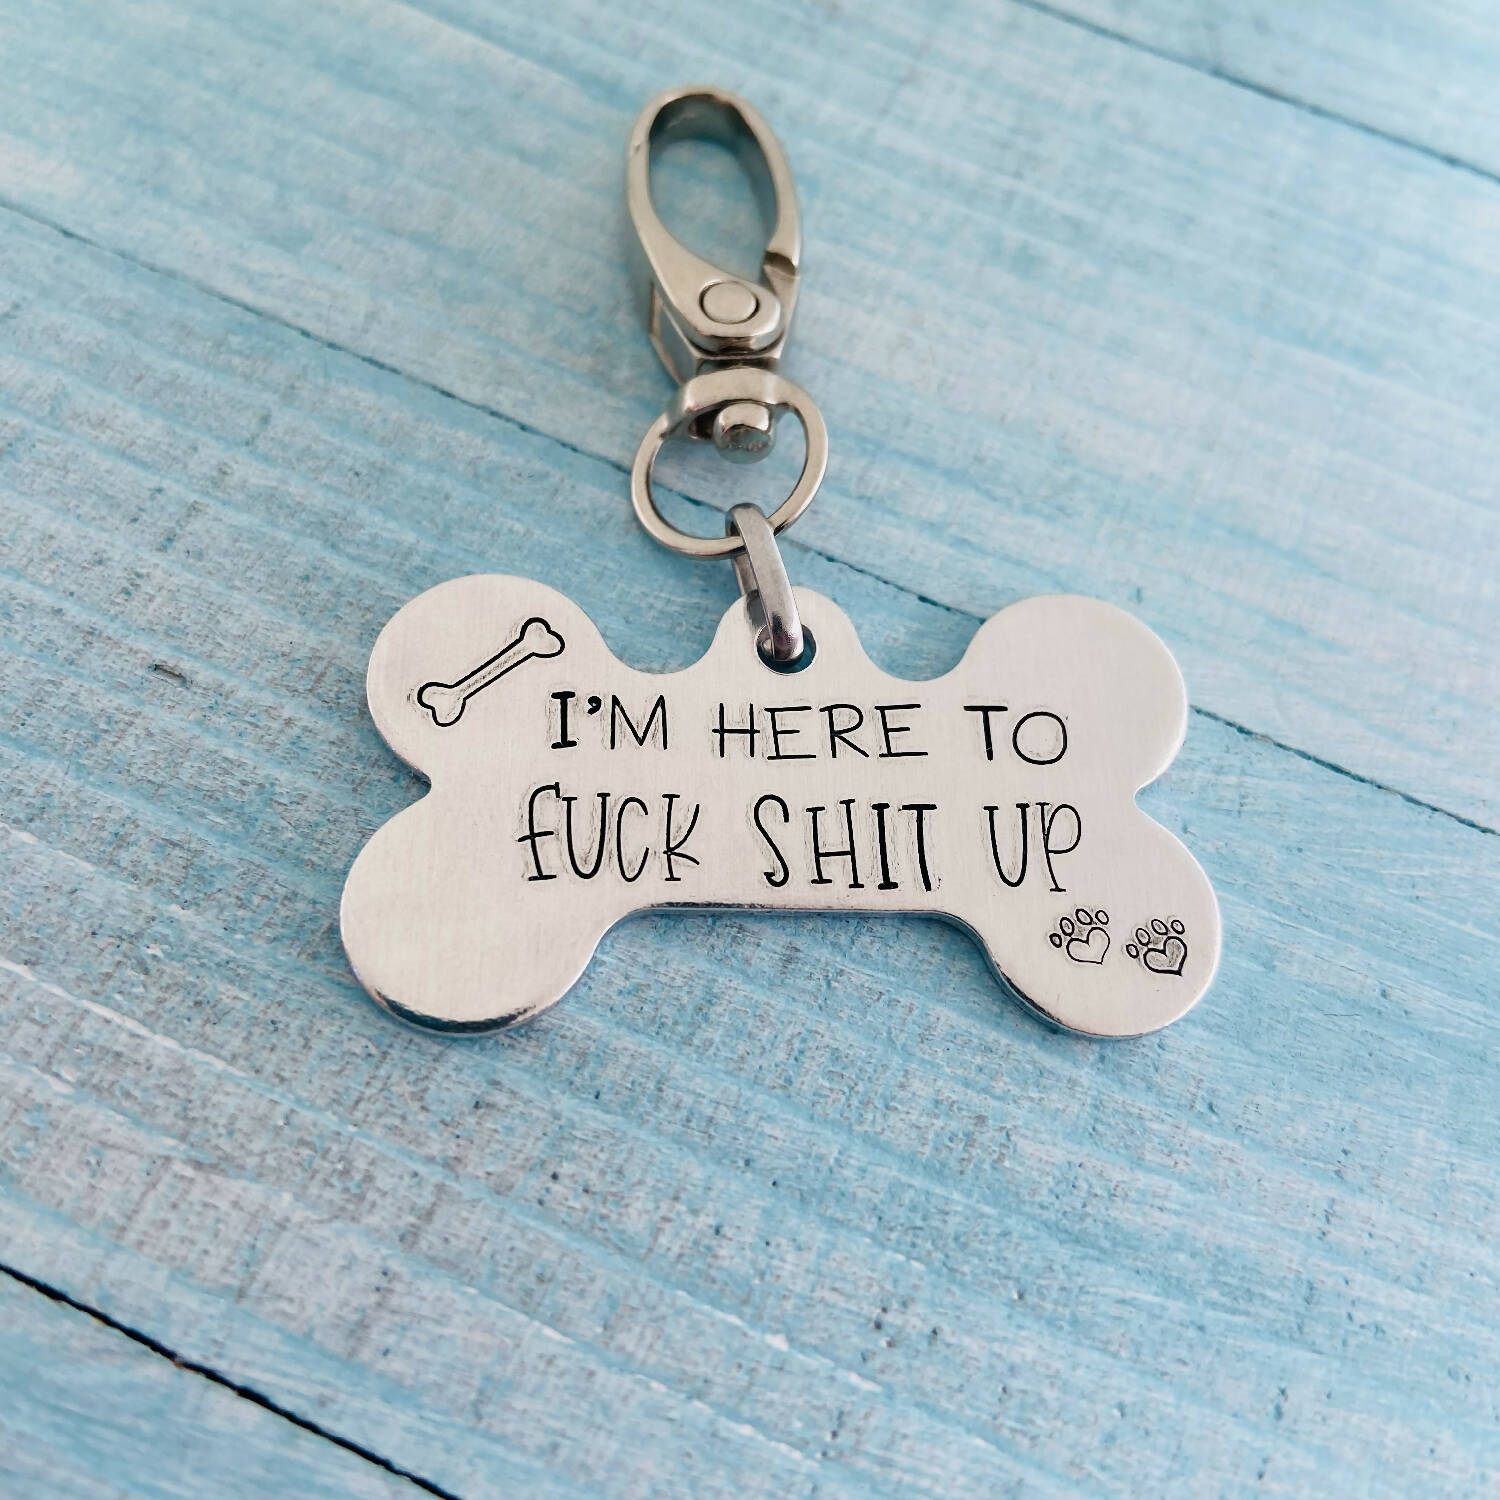 Pet Tag - I'm here to fuck shit up